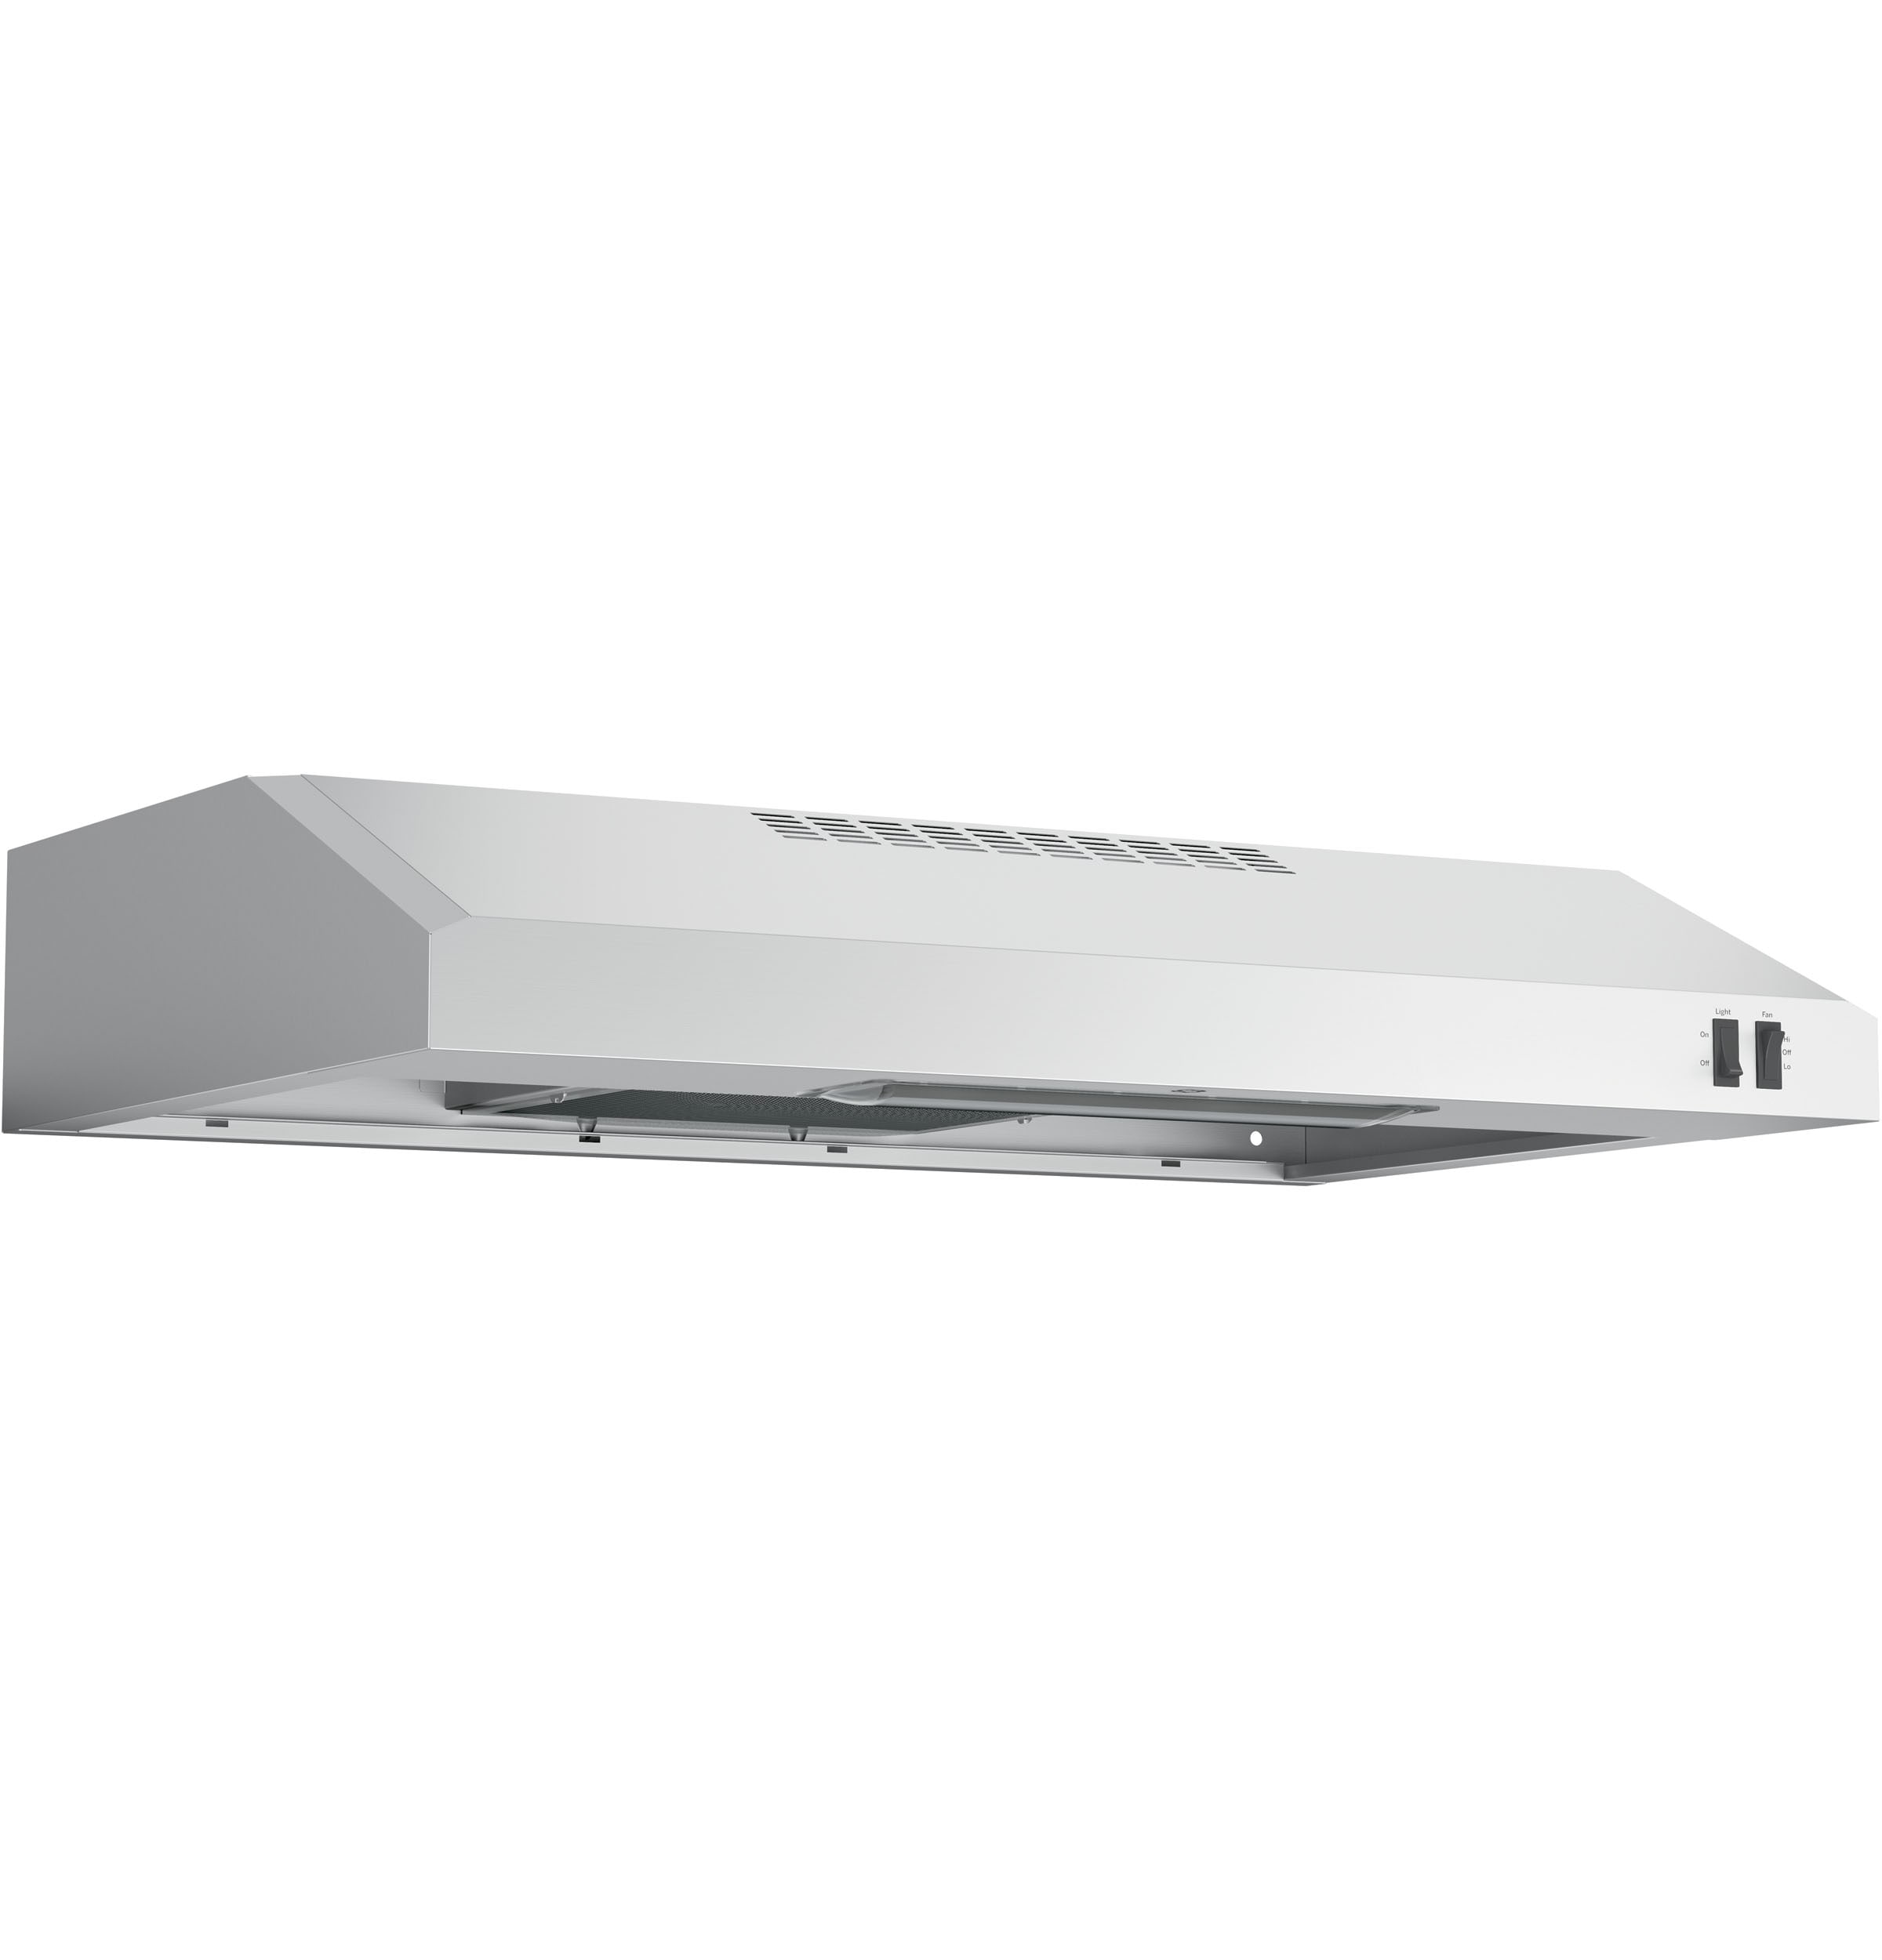 EVERKITCH Range Hood 30 inch Under Cabinet, EVERKIcH, 800CFM, Stainless Steel Kitchen Vent Stove Hood, Touch Control, Permanent Stainless